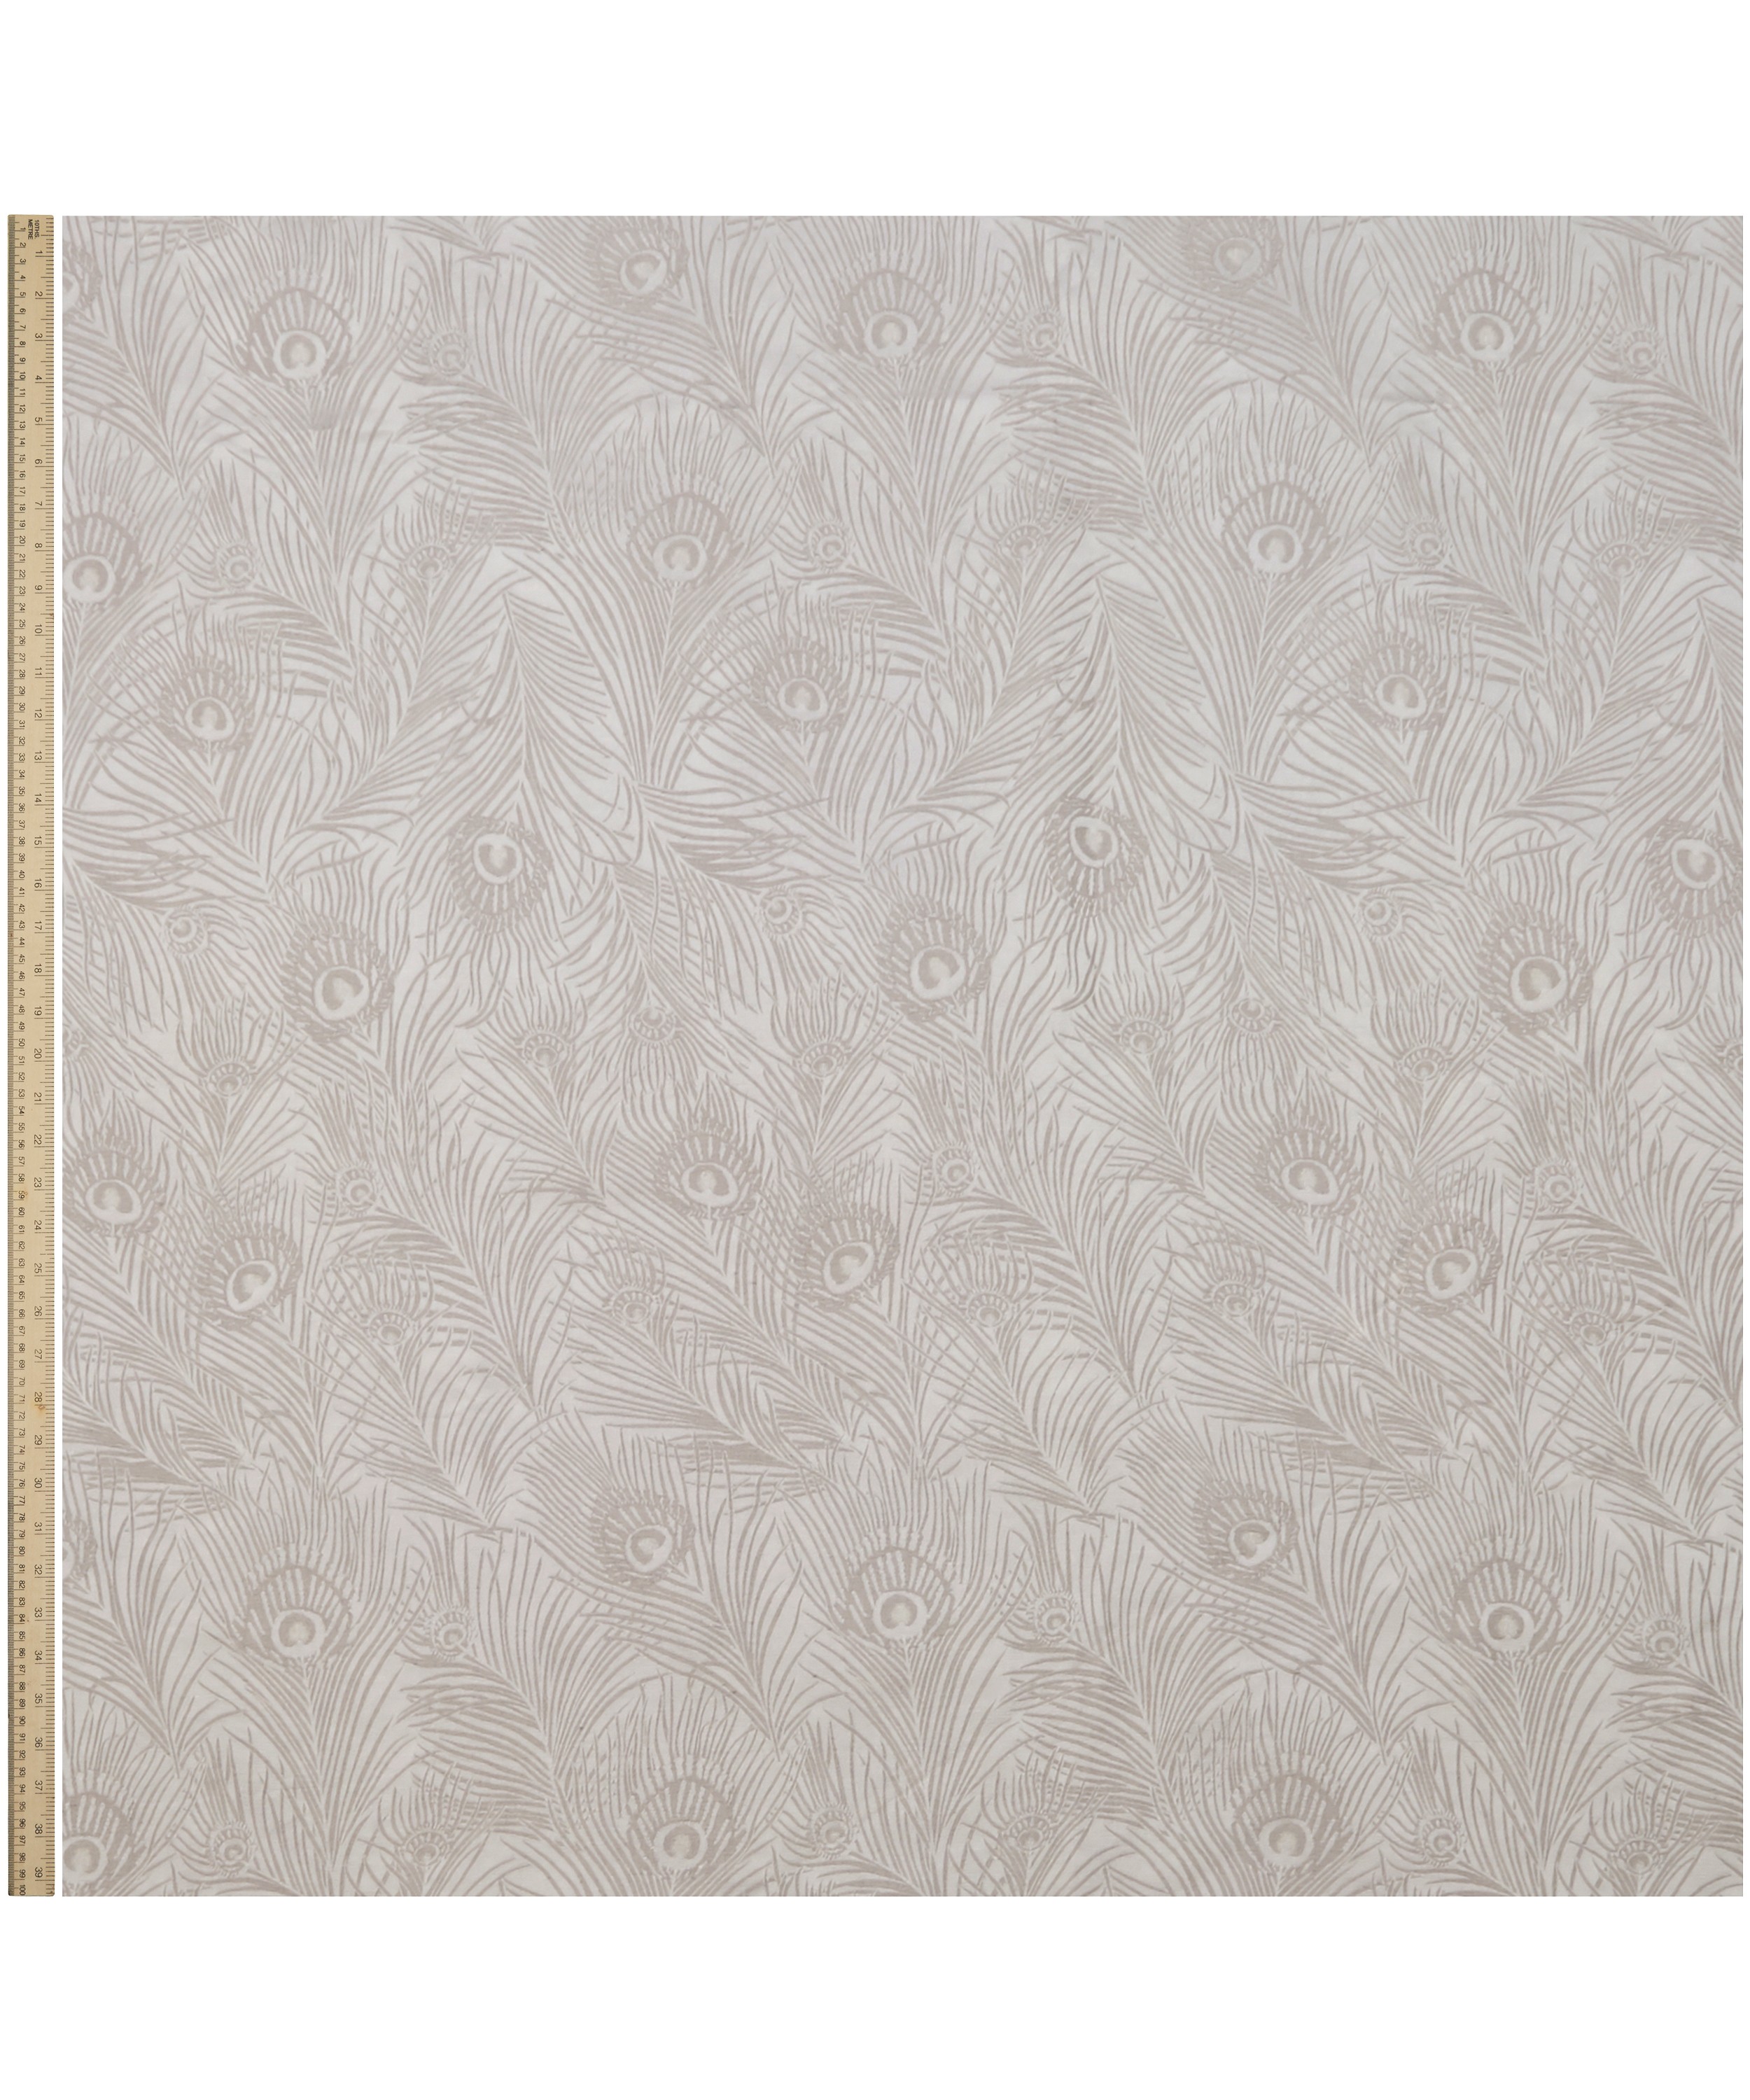 Liberty Interiors - Hera Plume Dyed Jacquard in Pewter image number 2